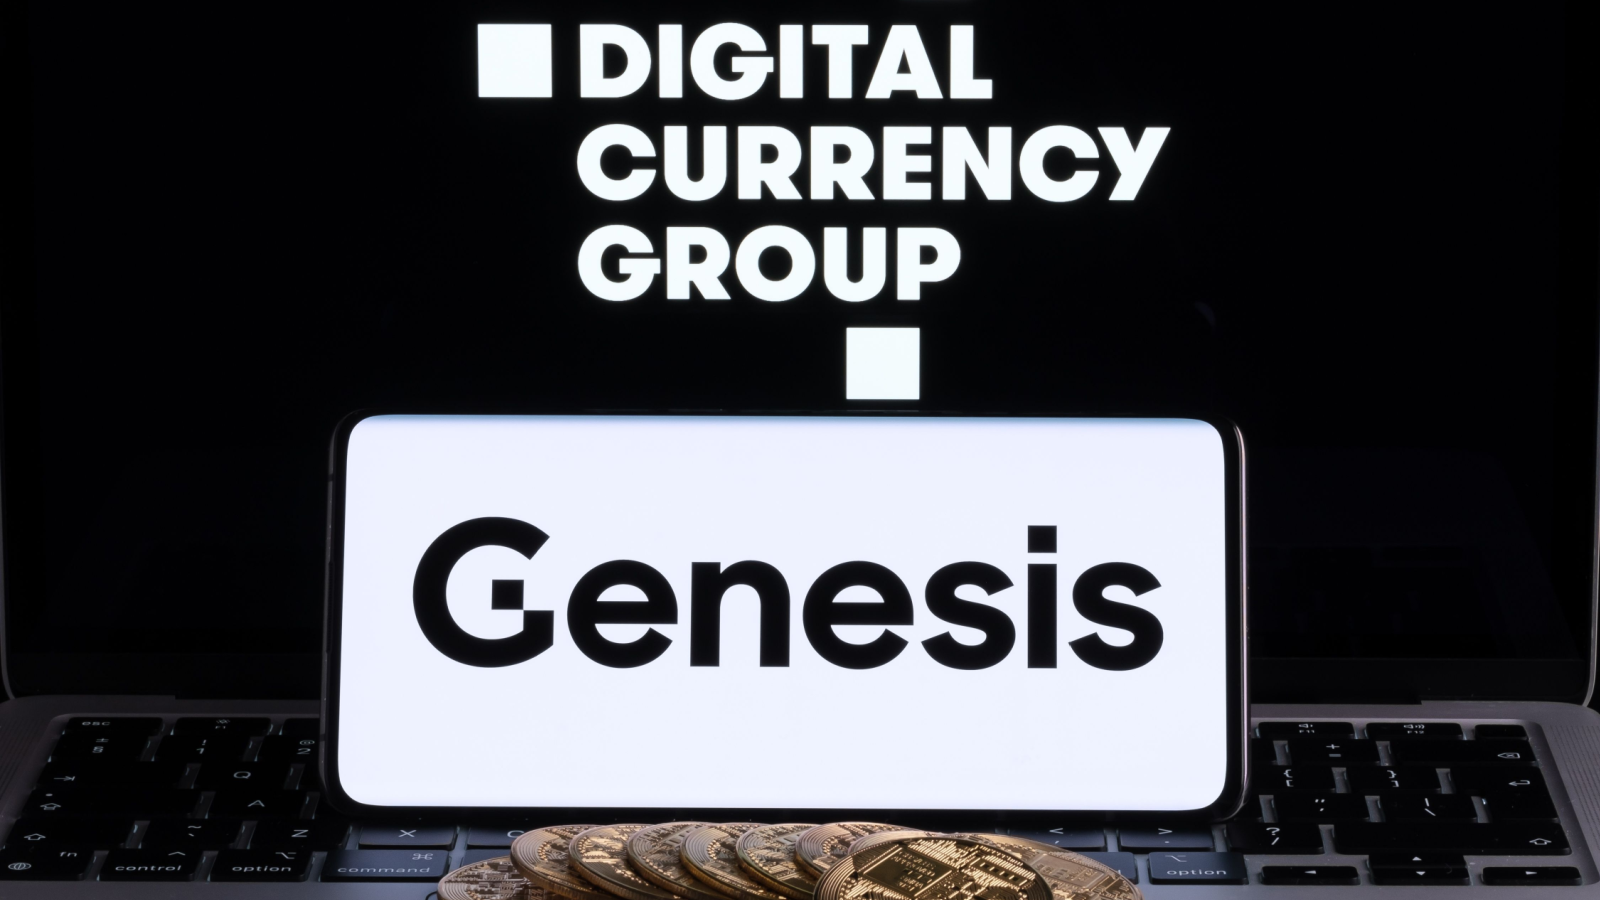 Genesis Global Trading crypto company logo seen on screen of smartphone with bitcoin tokens. Crypto lender owned by Digital Currency Group.